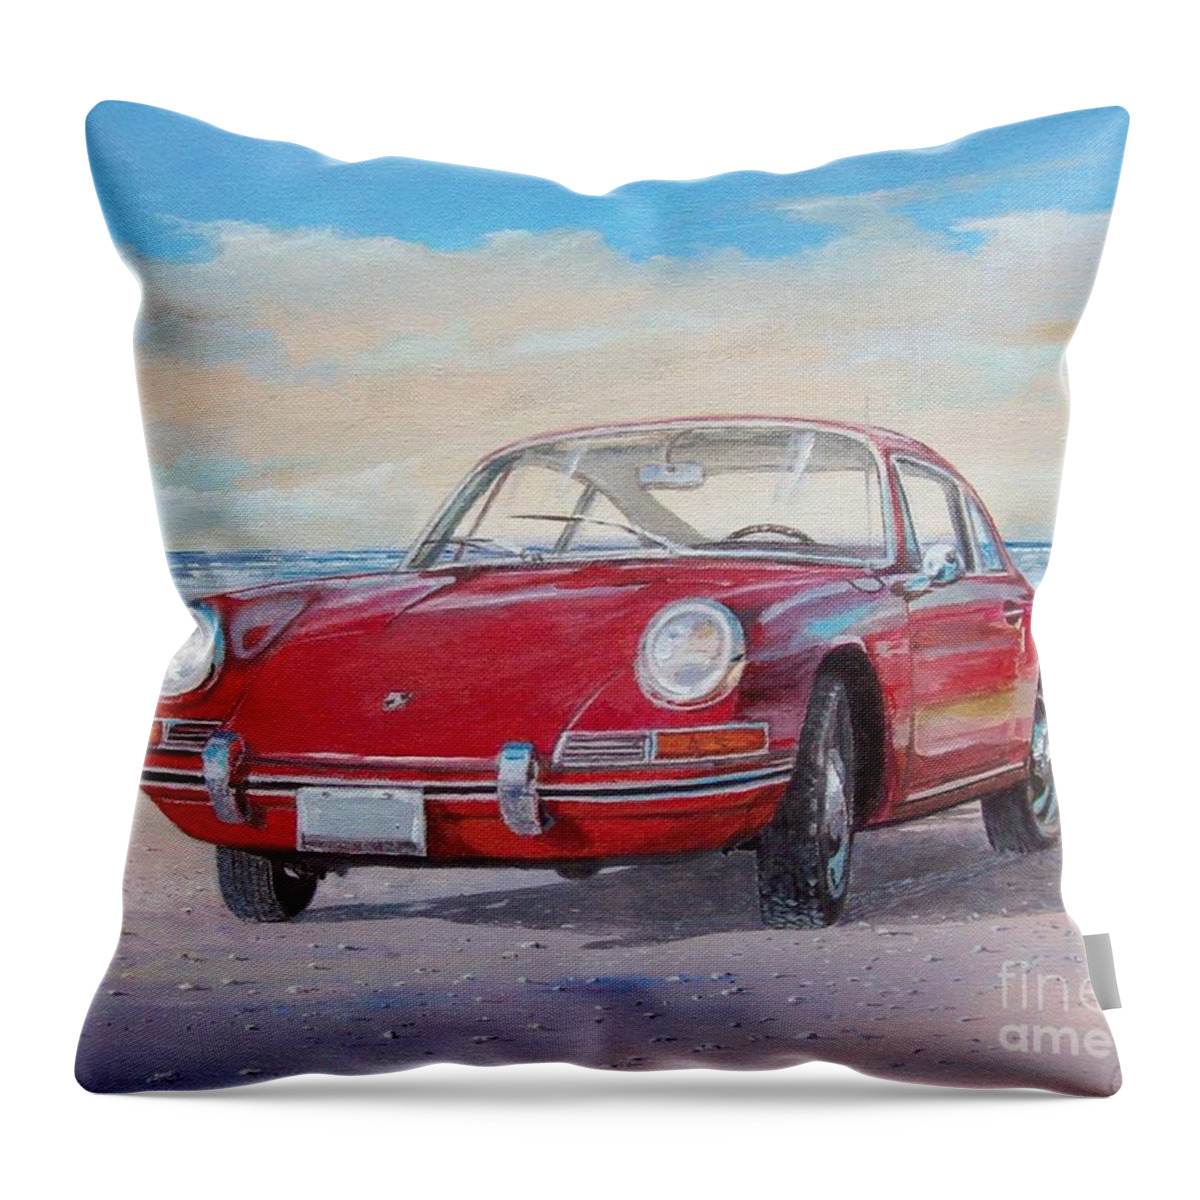 Classic Cars Paintings Throw Pillow featuring the painting 1967 Porsche 912 by Sinisa Saratlic